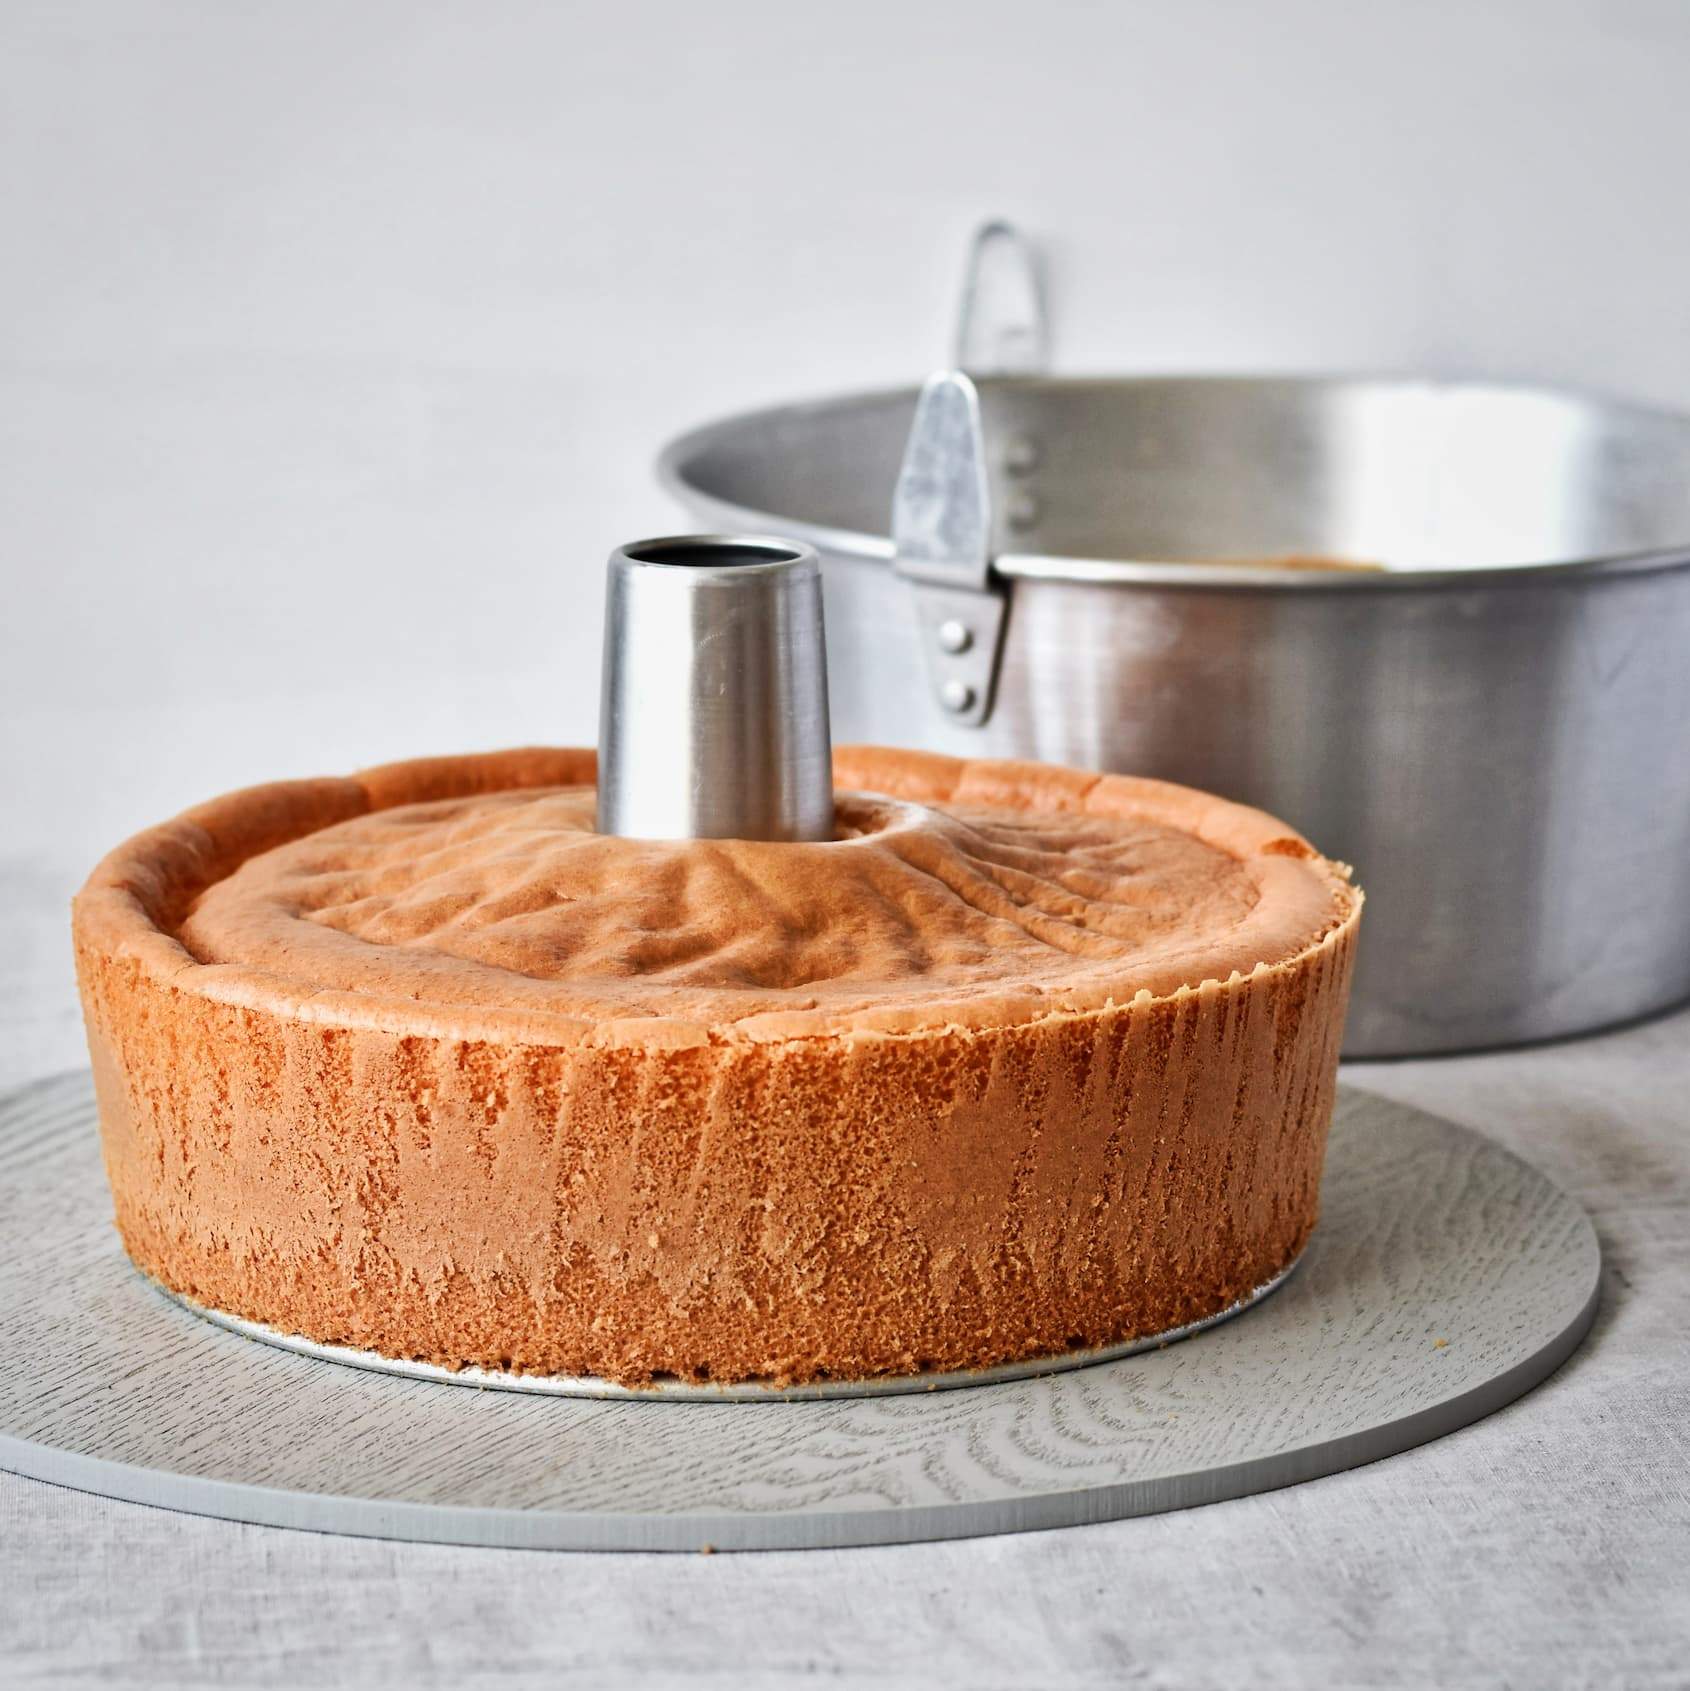 Best cake tin 2021: | The Independent